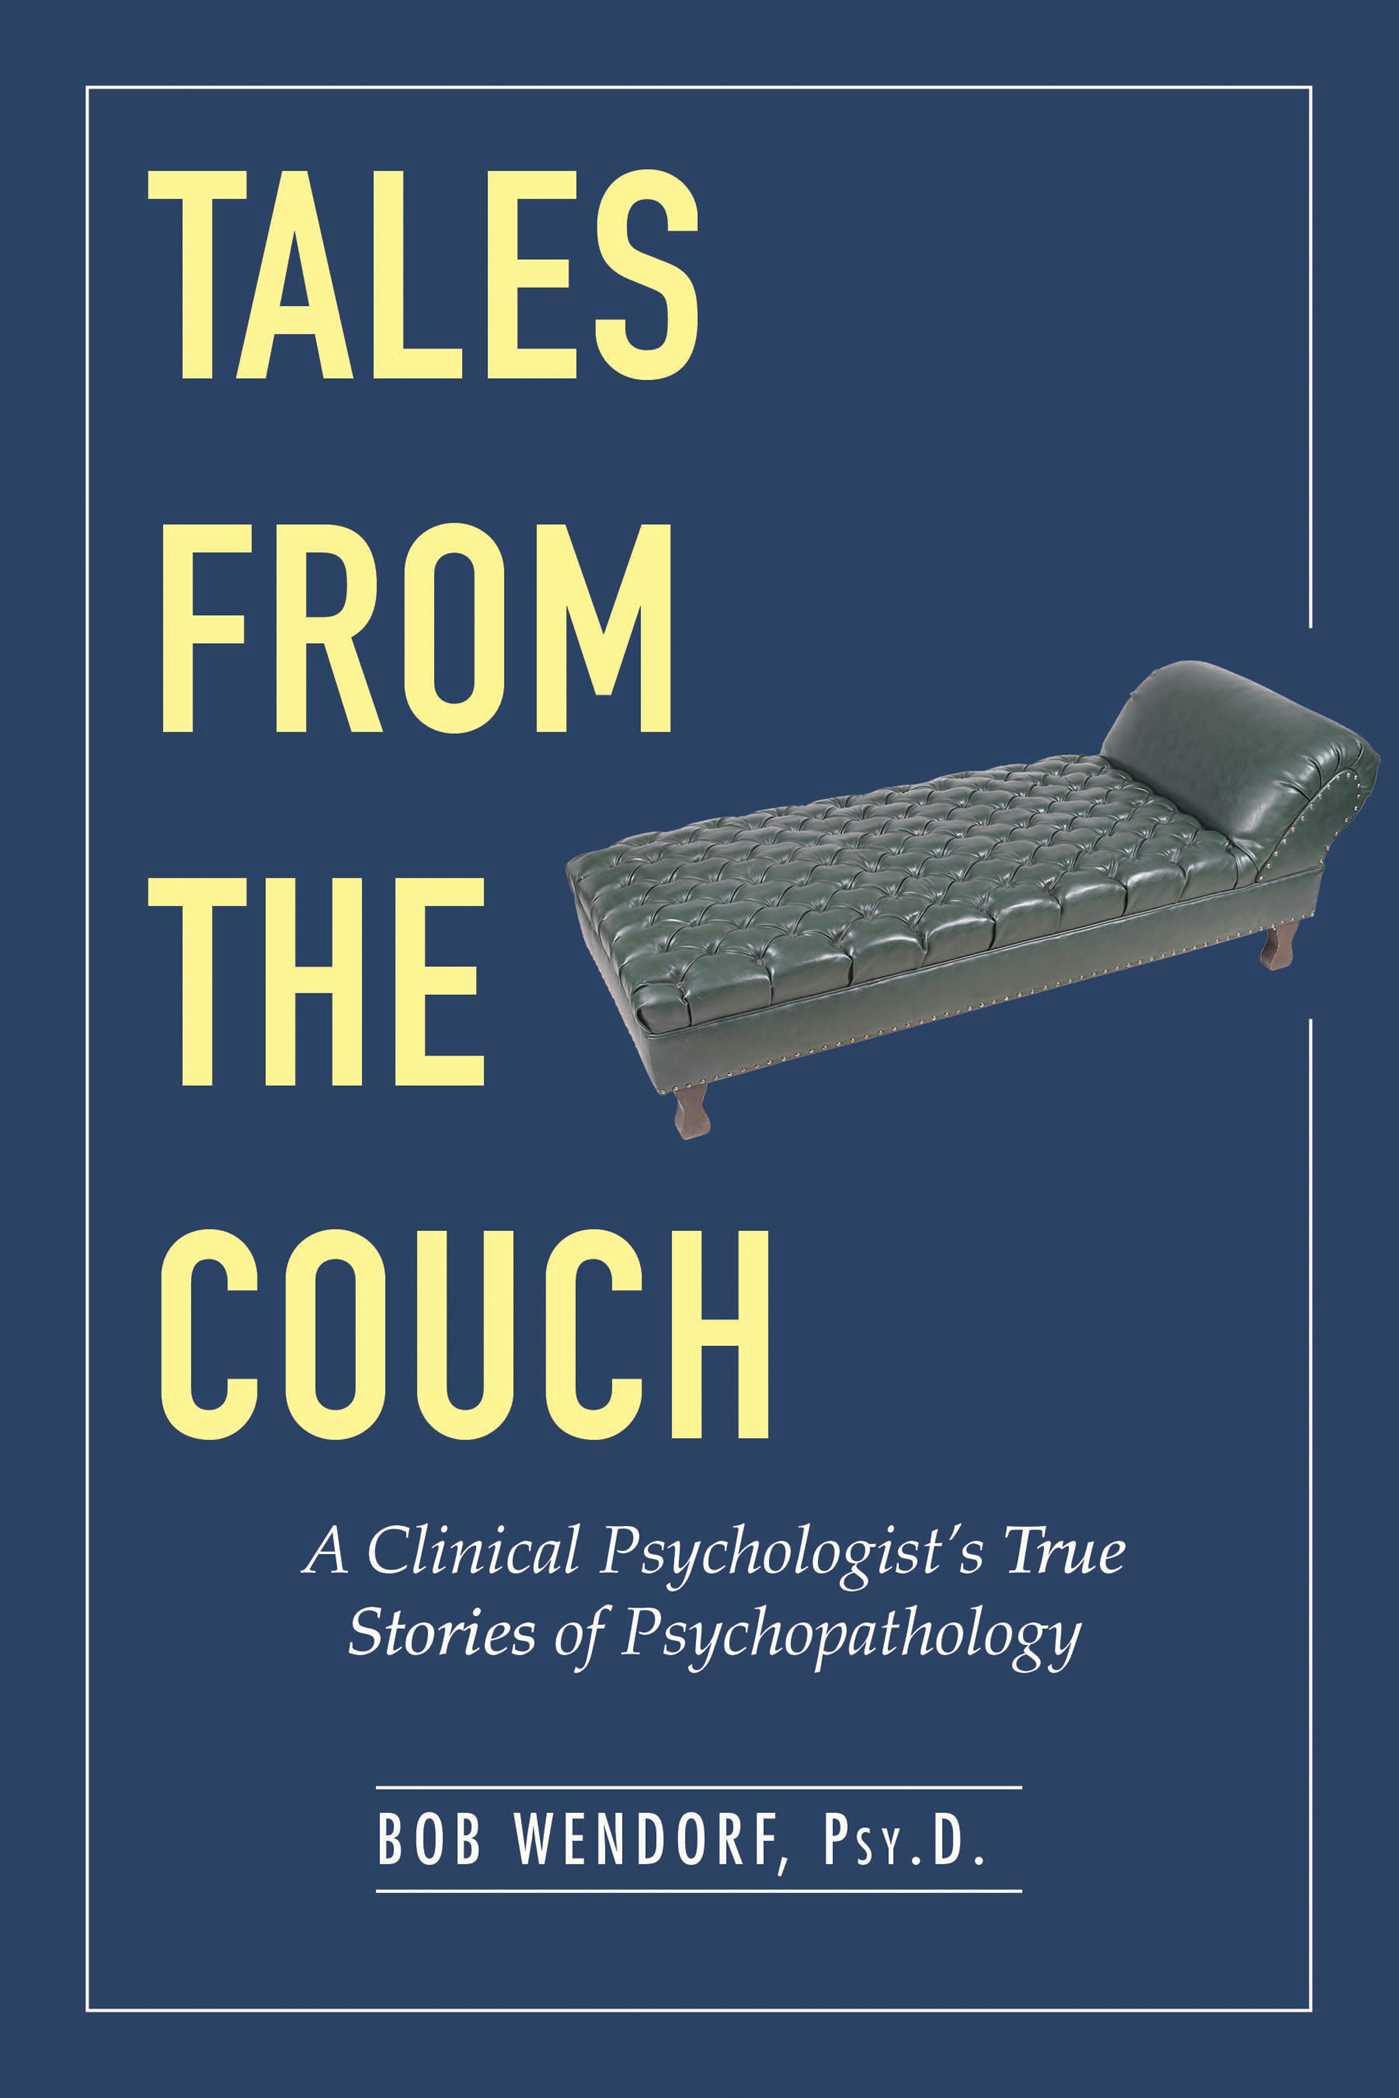 Tales from the Couch: A Clinical Psychologist's True Stories of Psychopathology - Bob Wendorf